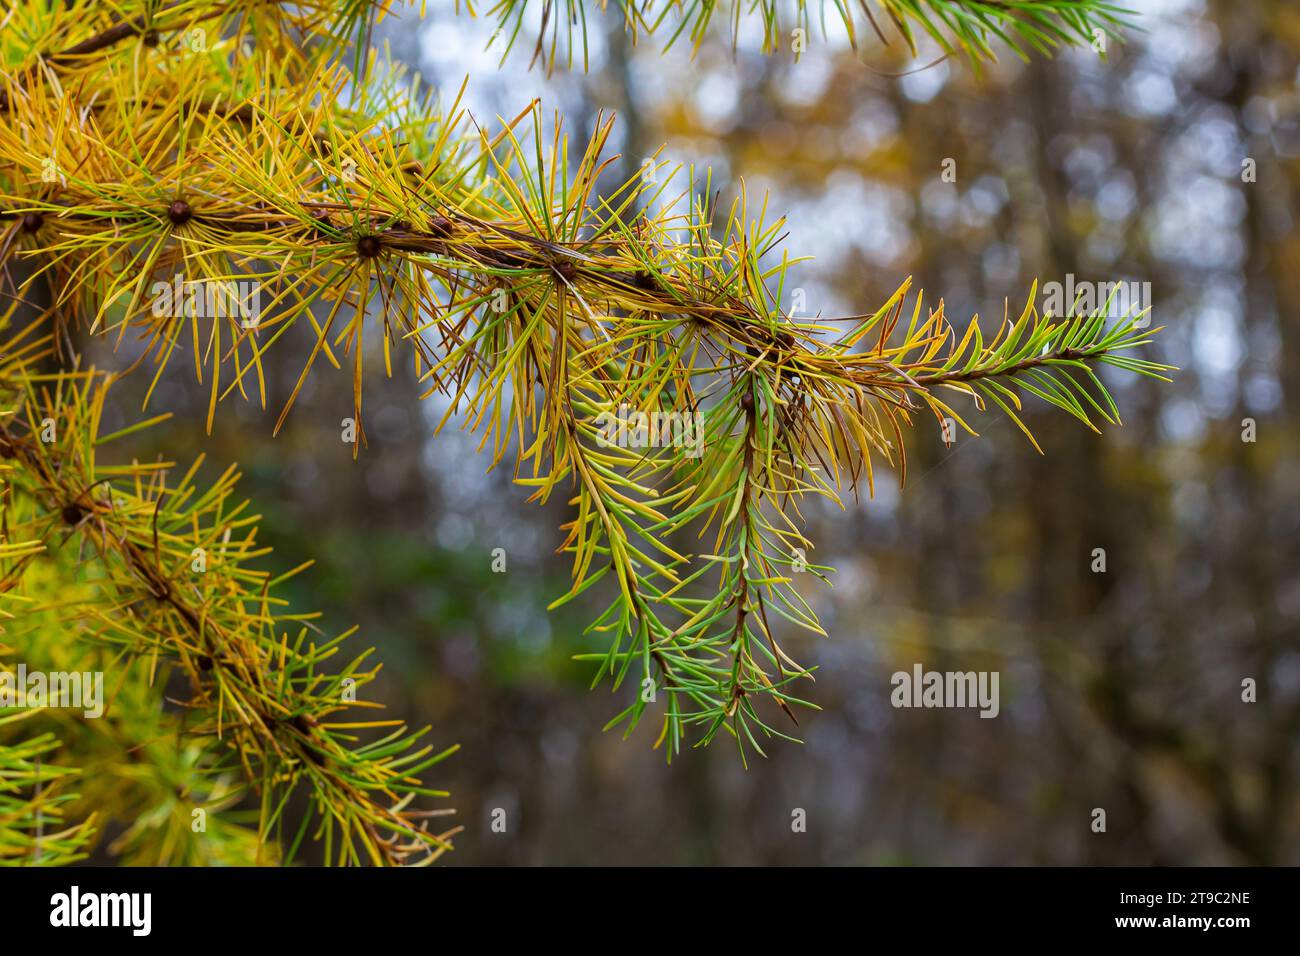 Yellow larch branch with a pine cone in autumn in a wet forest. Stock Photo